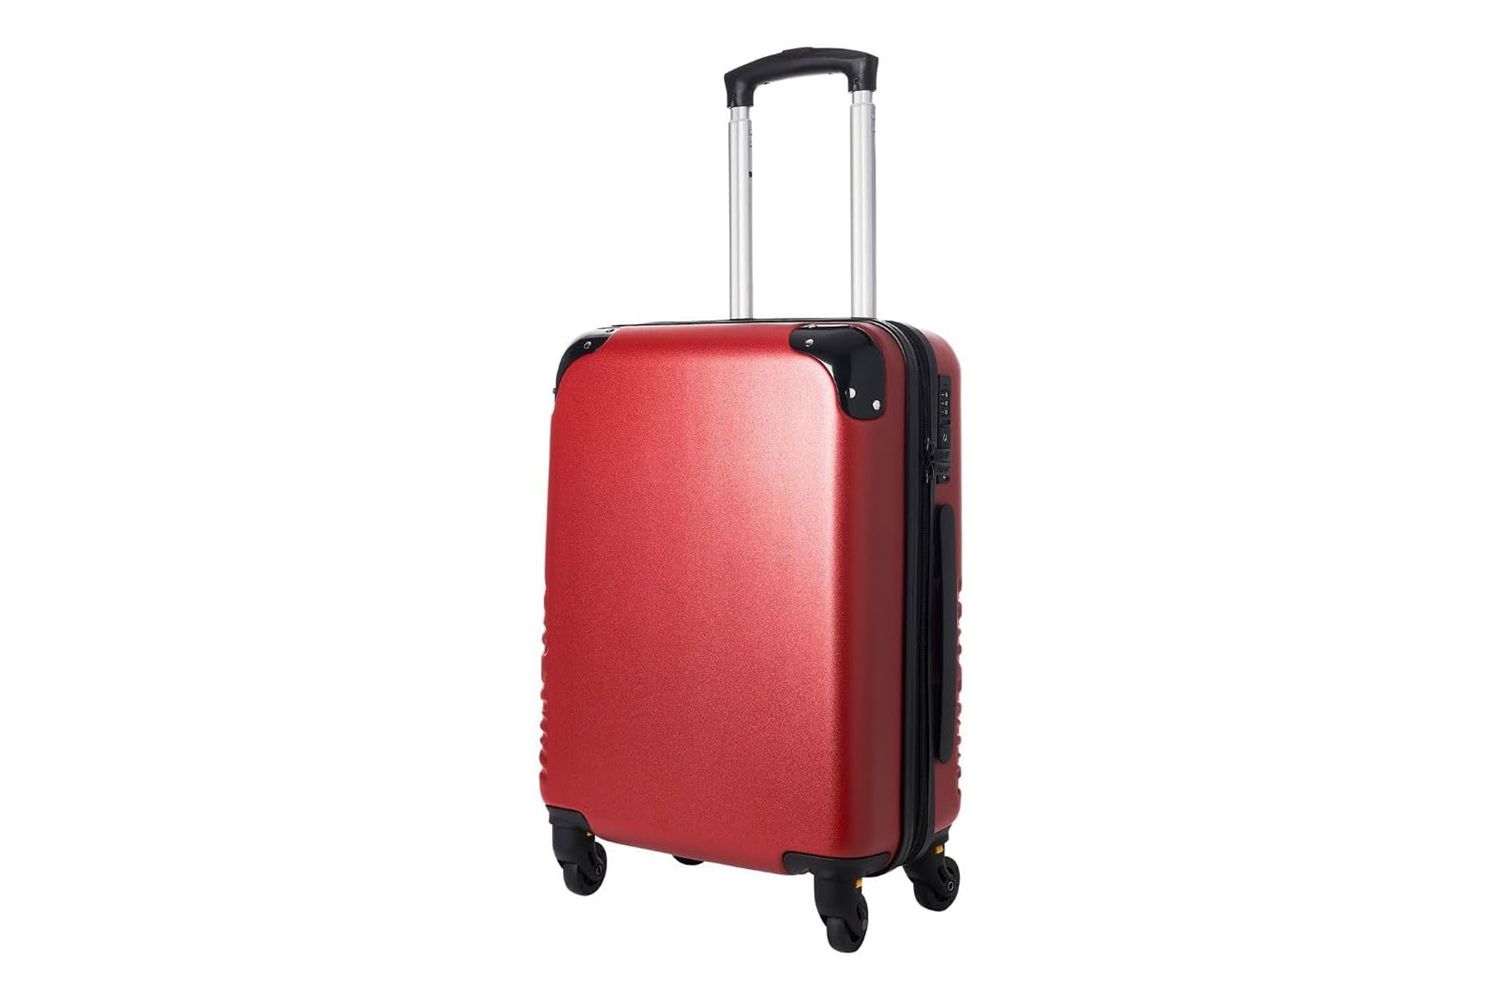 Take OFF Luggage 18 Inch Suitcase 2.0